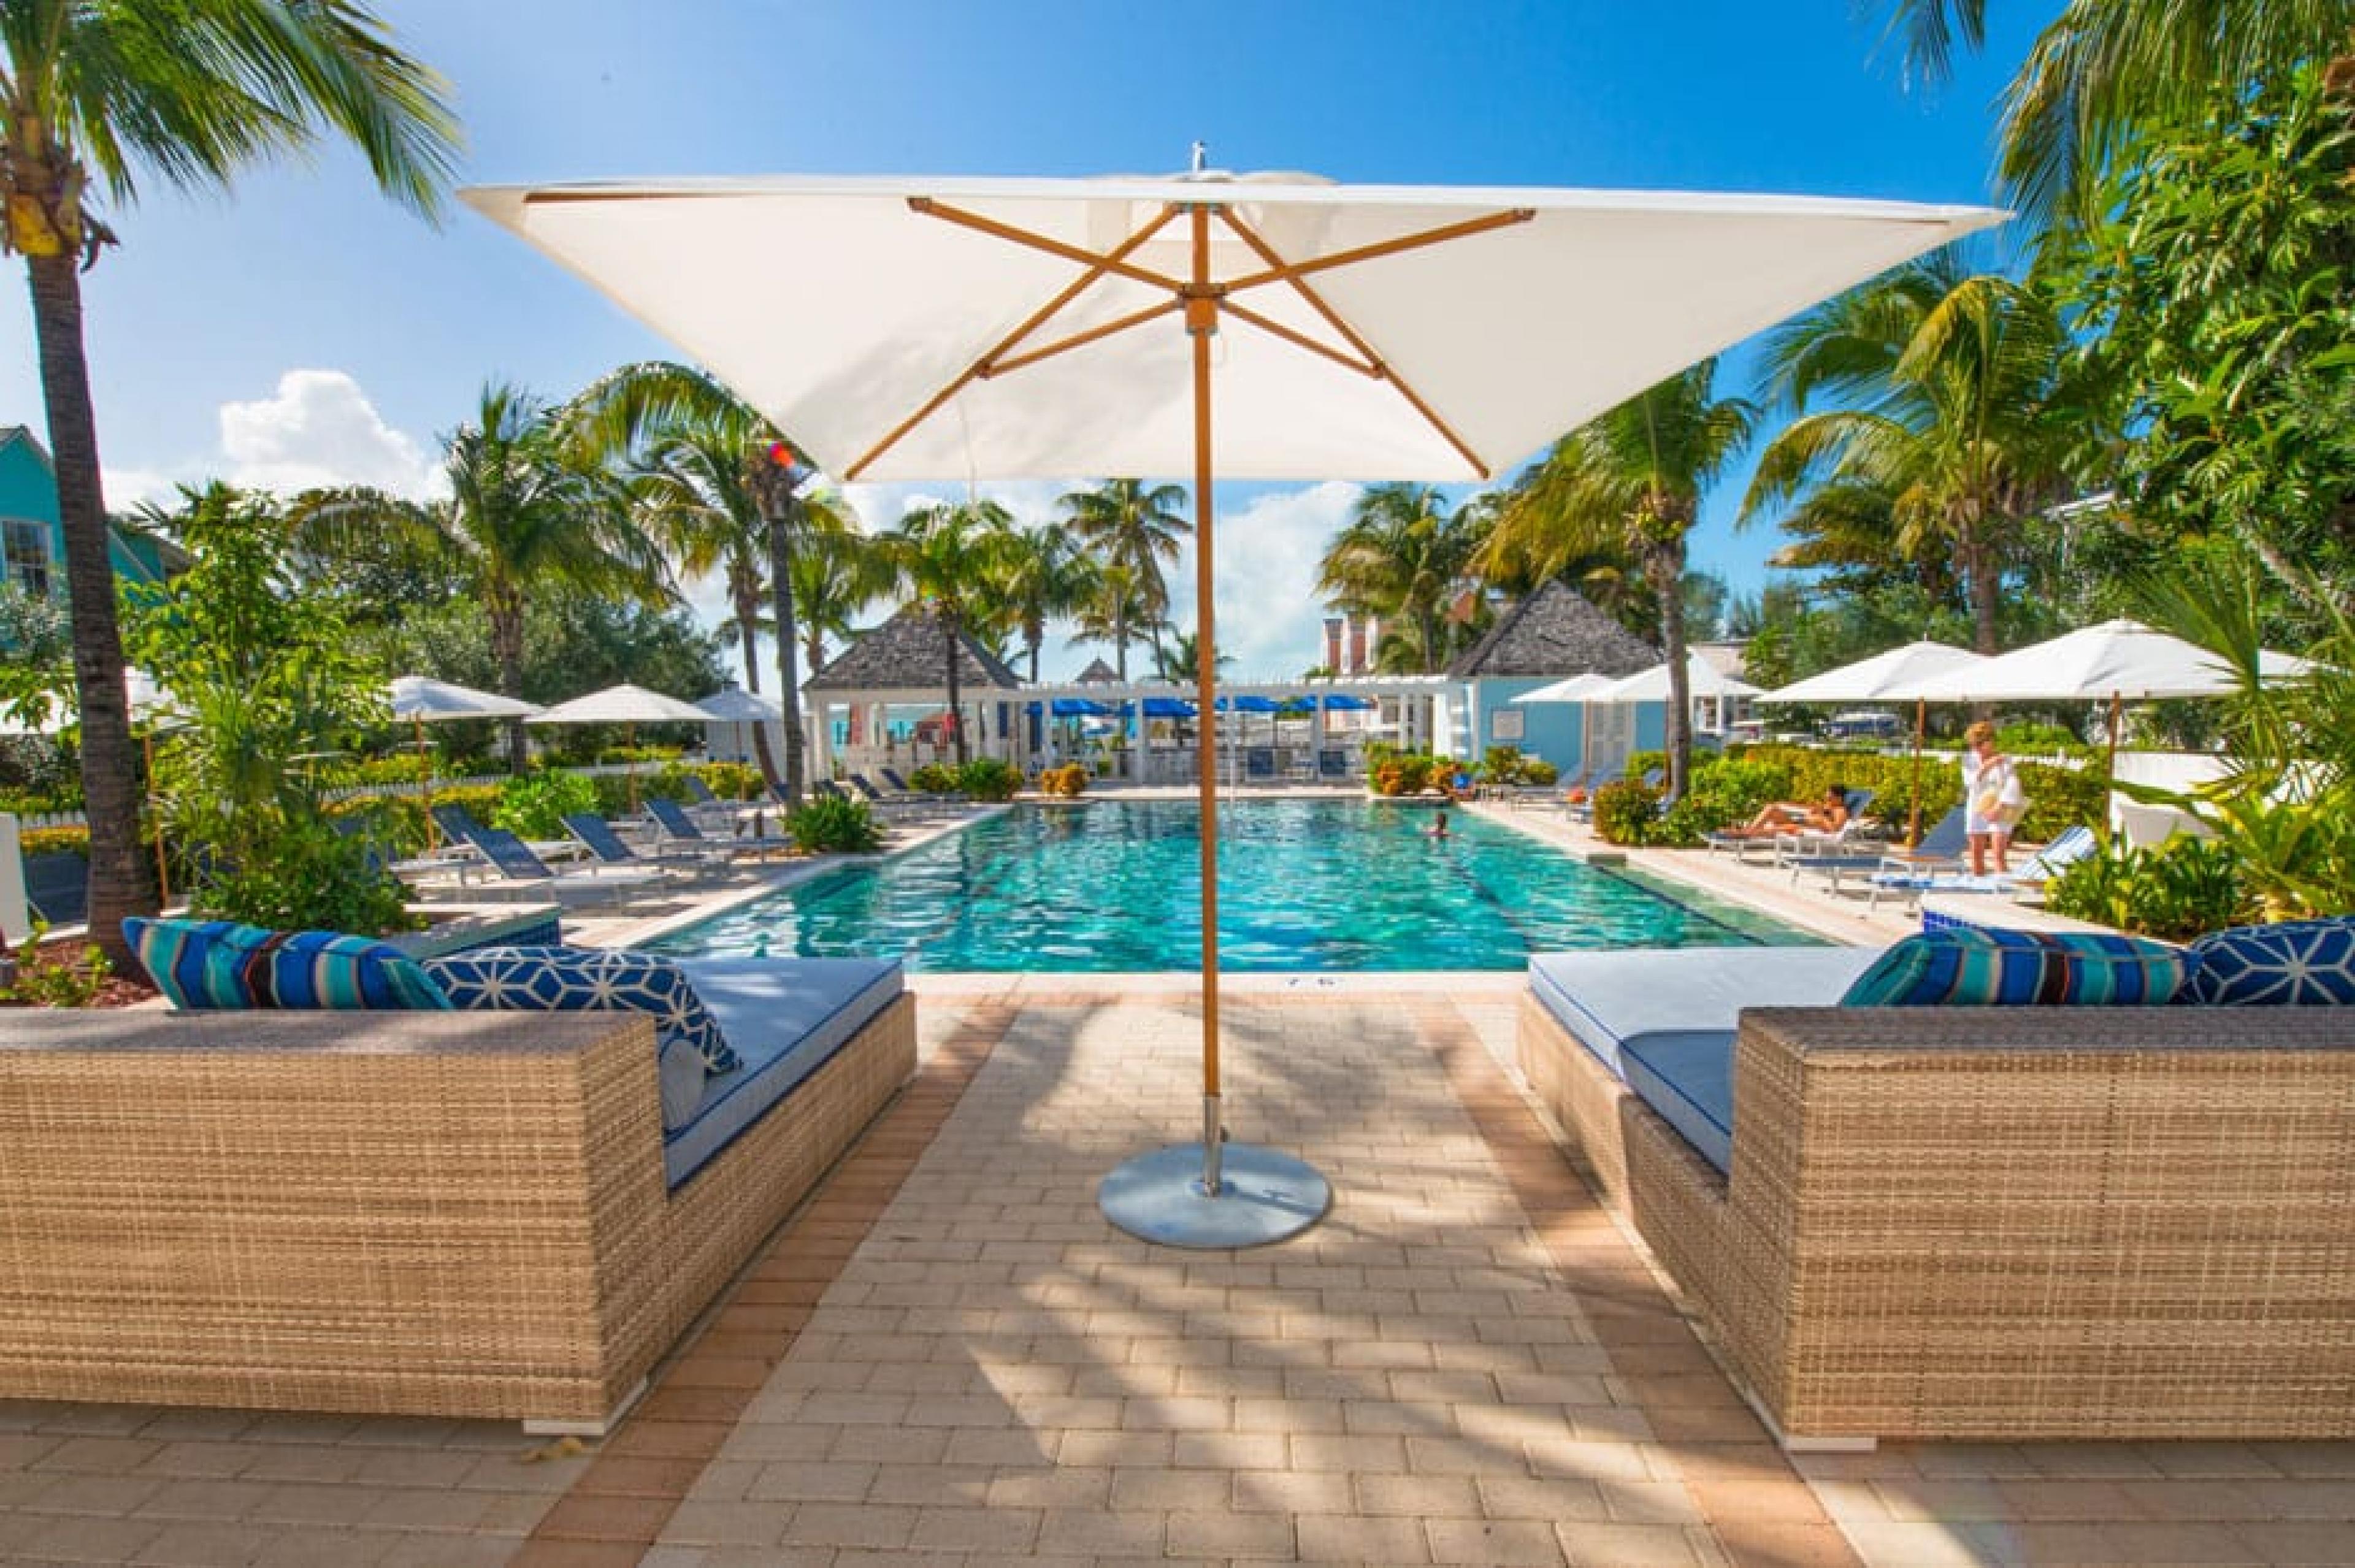 Pool Lounge at  Valentines Resort and Marina, Harbour Island, Caribbean